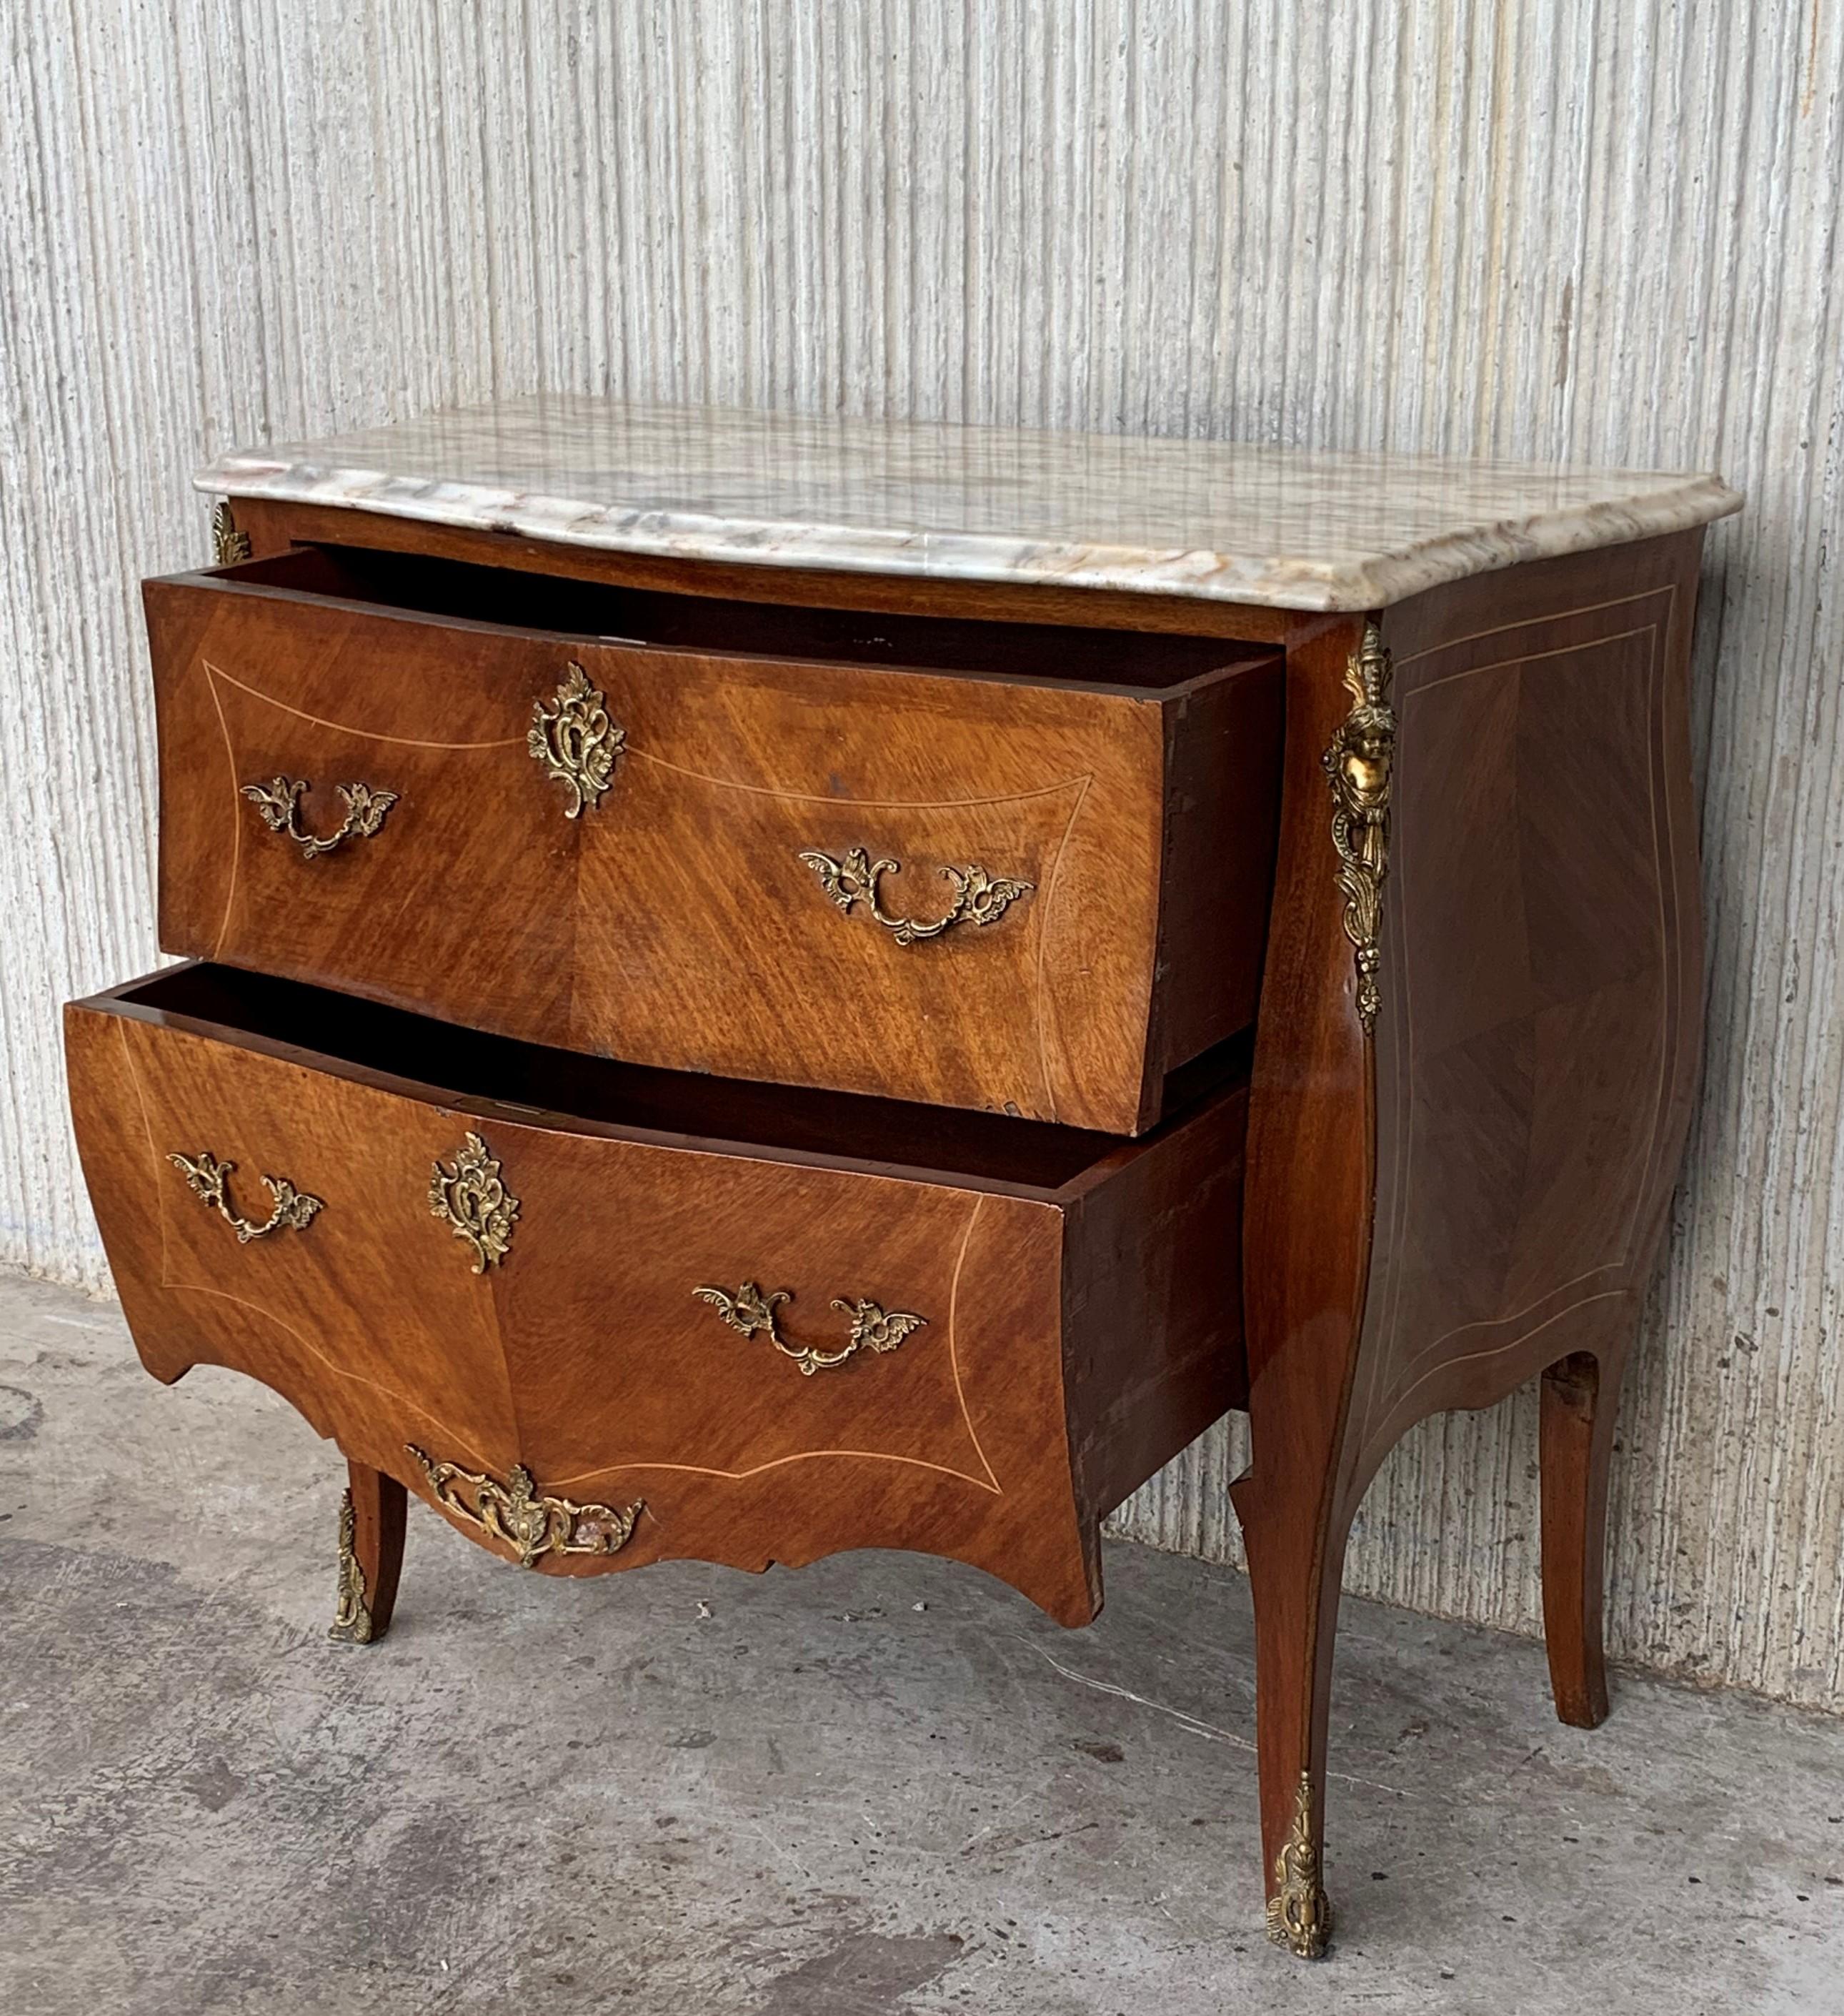 20th Century French Louis XV Marble-Top Bombe Chest or Commode with Two Drawers For Sale 3